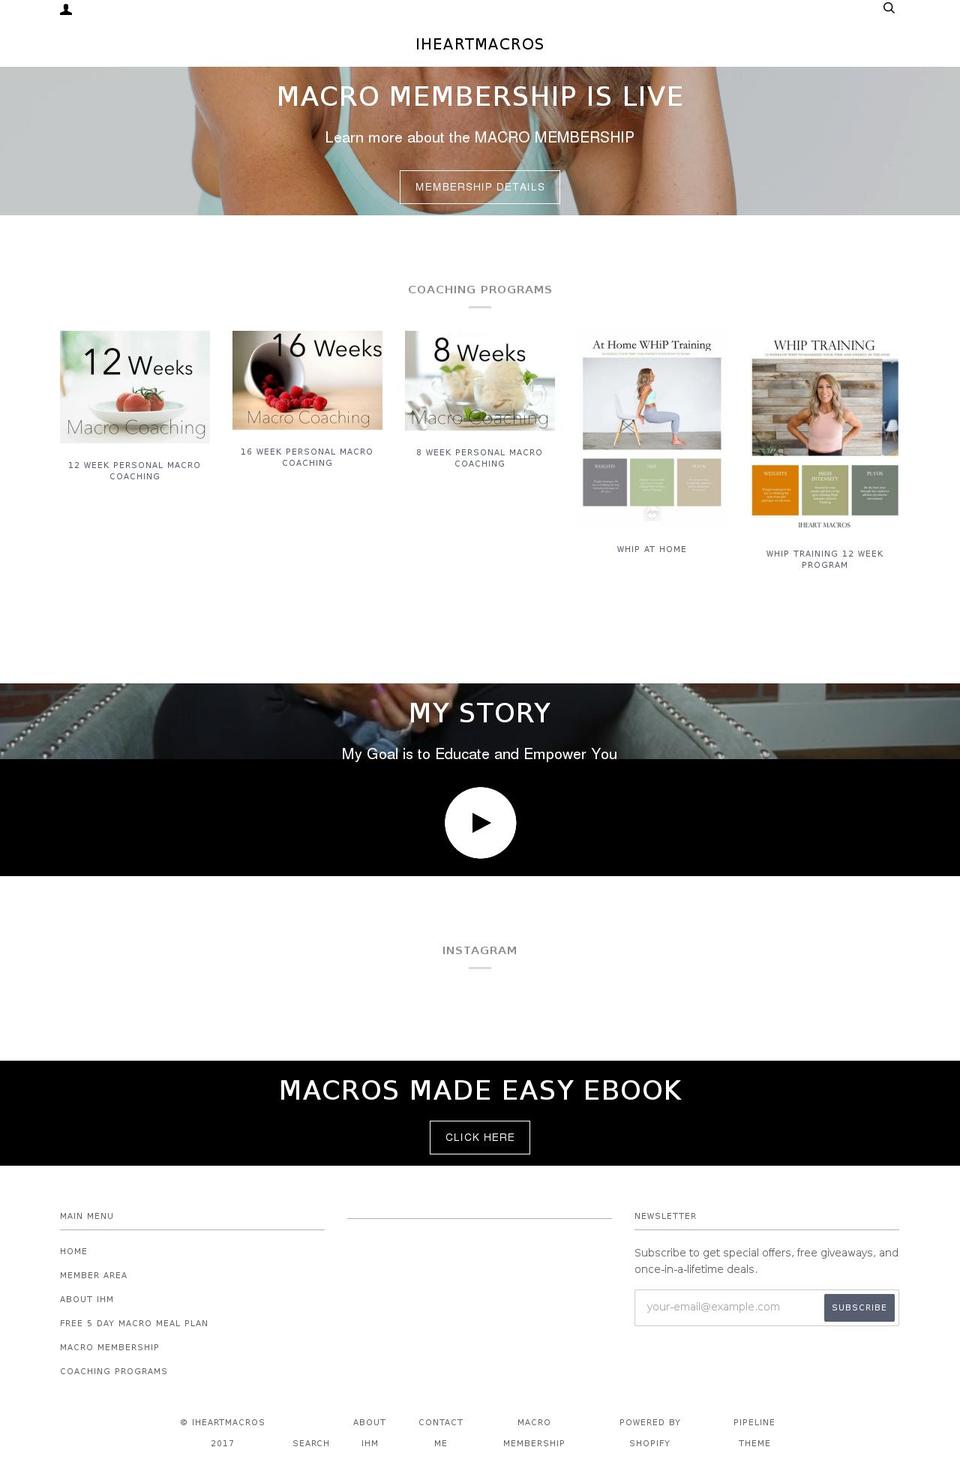 Spark Shopify theme site example iheartmacros.net